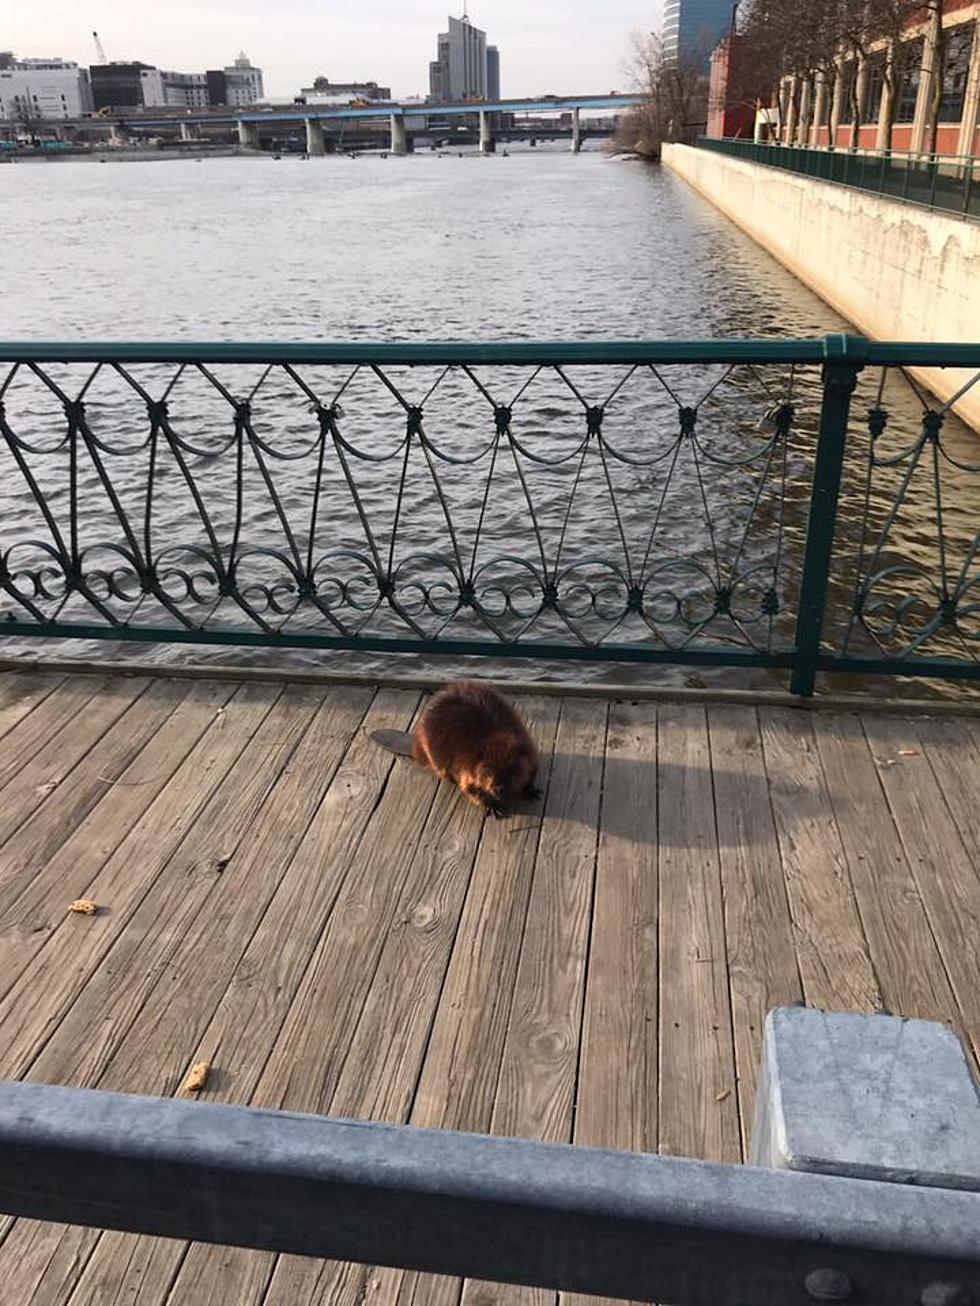 Beaver Found and Rescued on Sixth Street Bridge in Grand Rapids